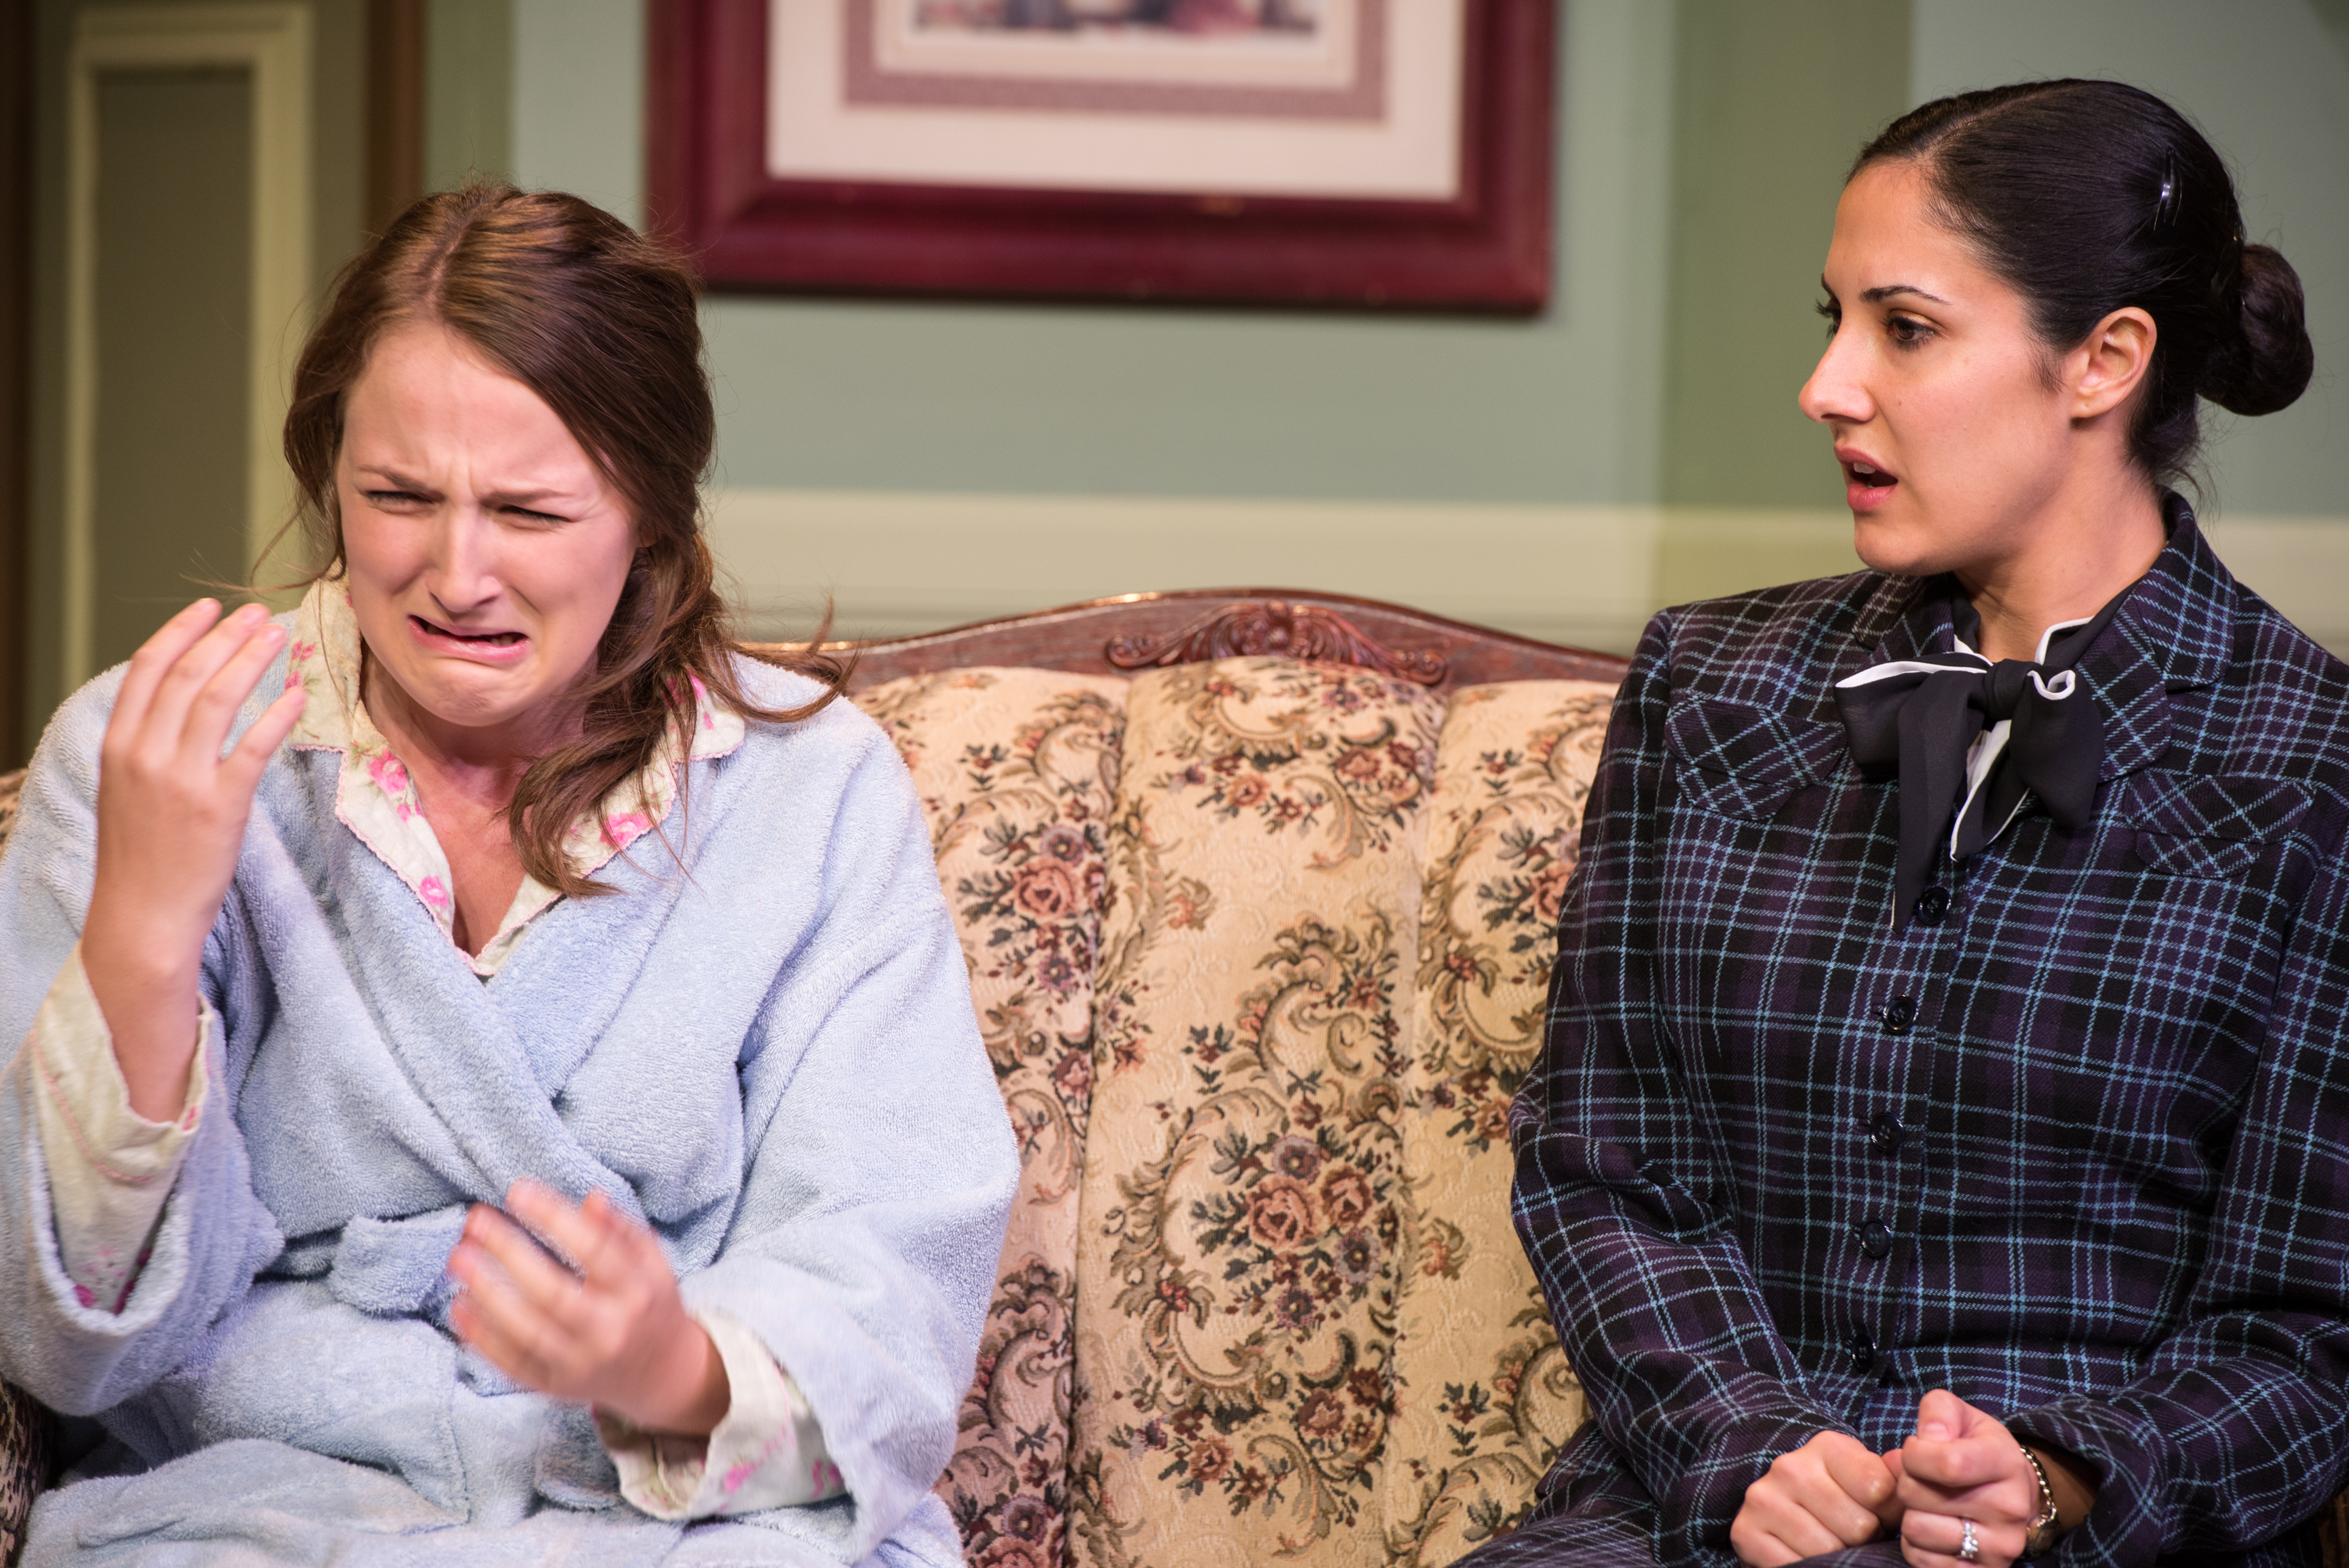 LA play review “And Miss Reardon Drinks a Little”